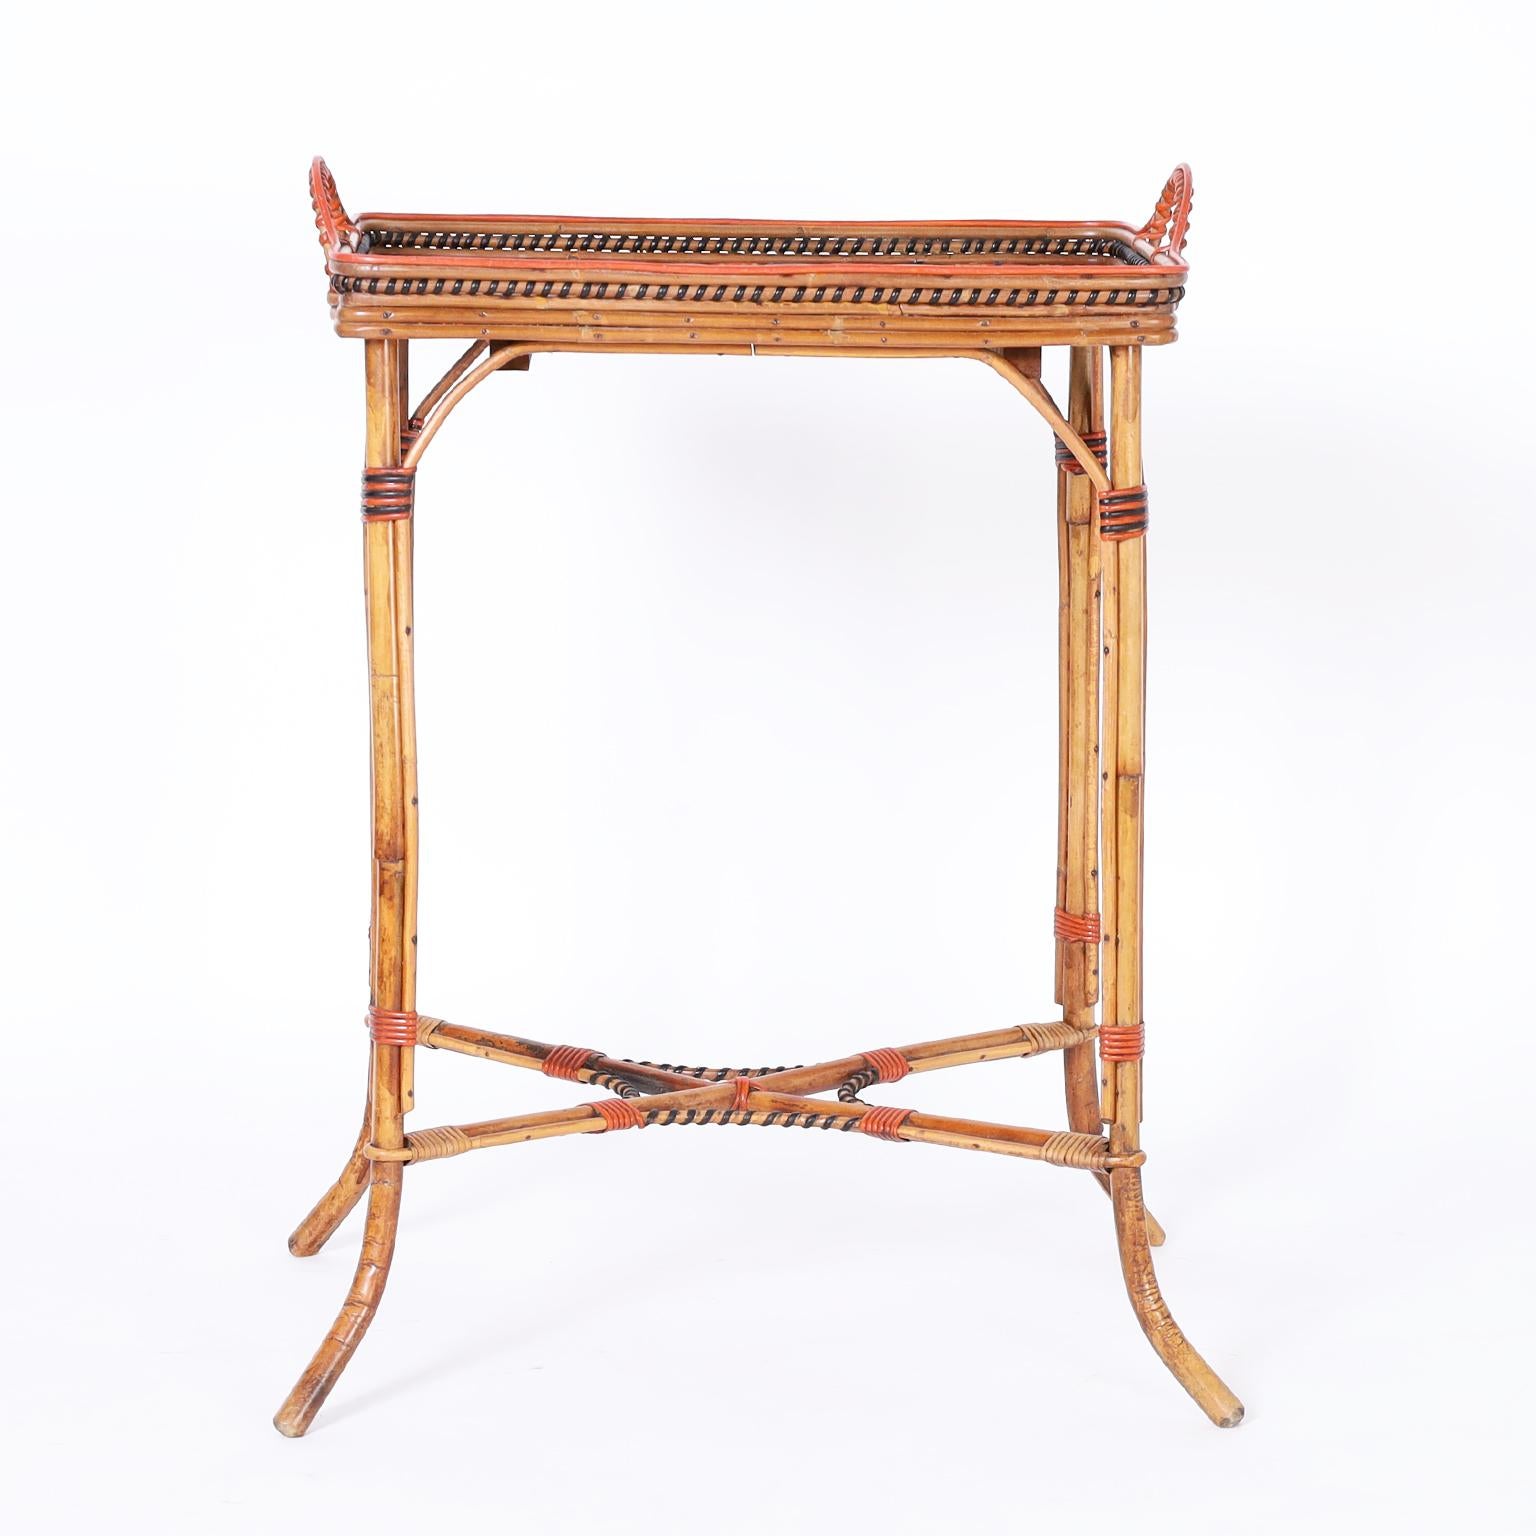 British Colonial Bamboo and Rattan Serving Stand or Bar